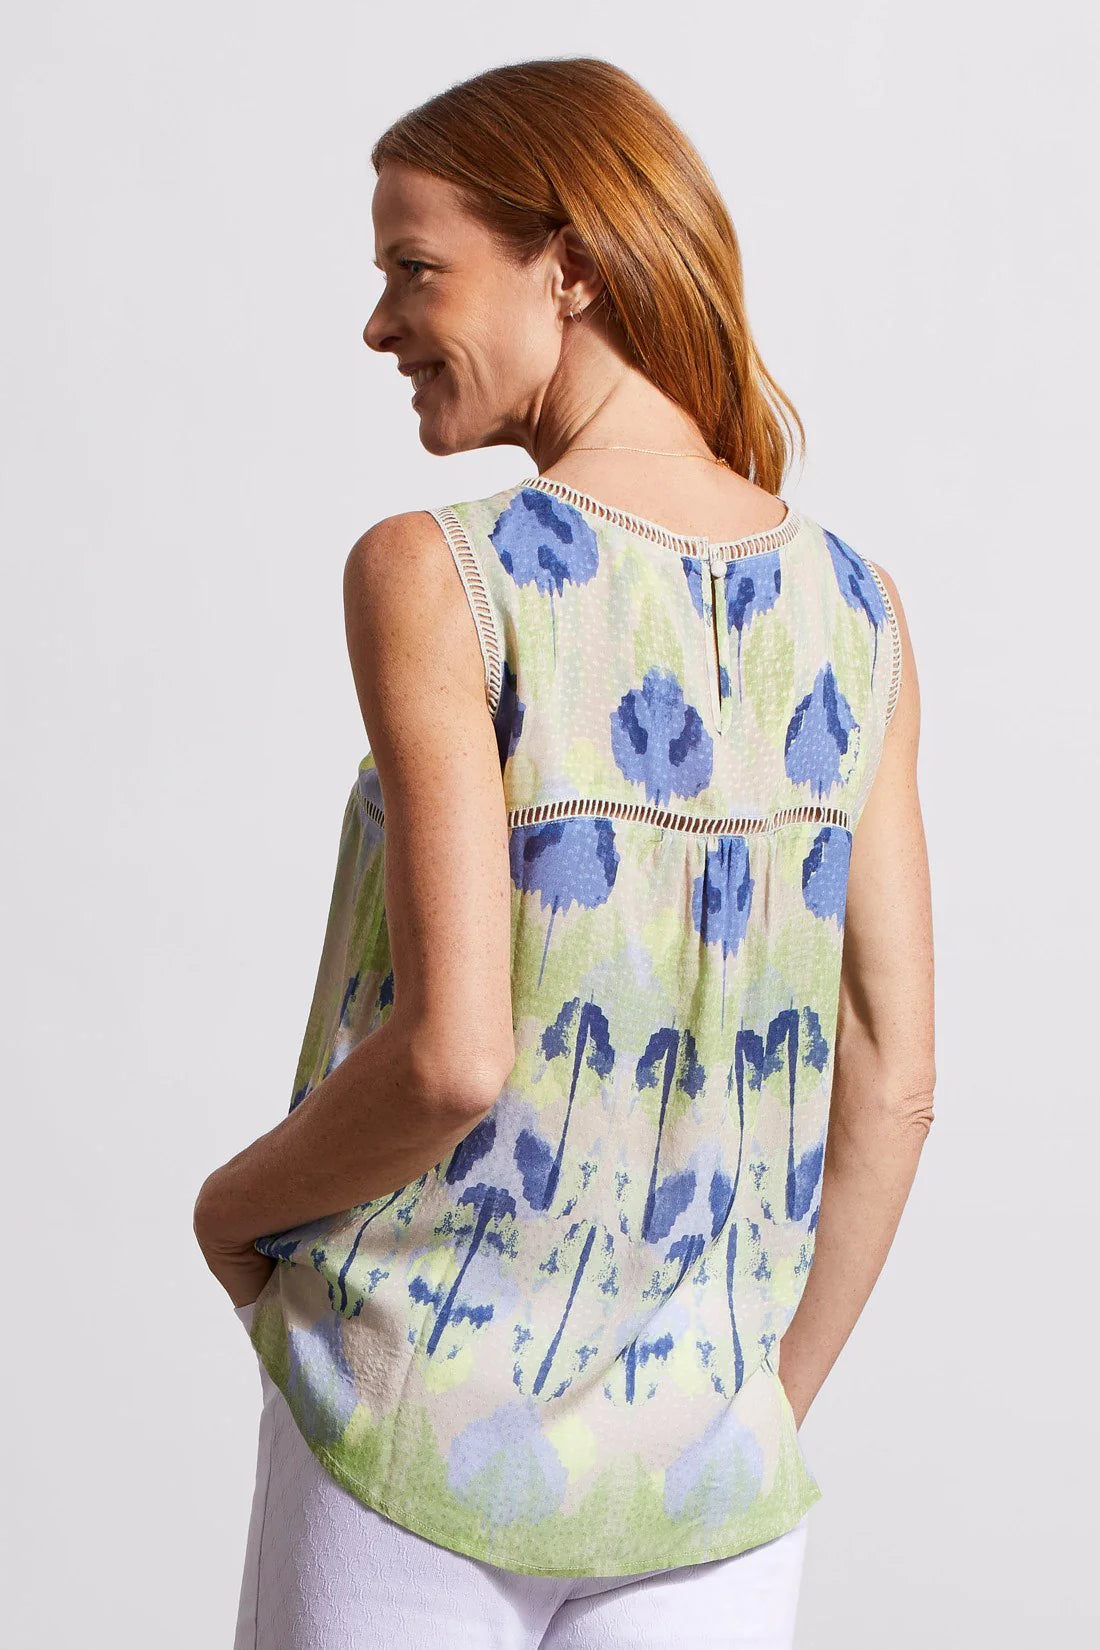 A colourful print cut from breezy fabric gives this sleeveless blouse a flowy fit. A side slit hem and ladder tape details add a chic touch.